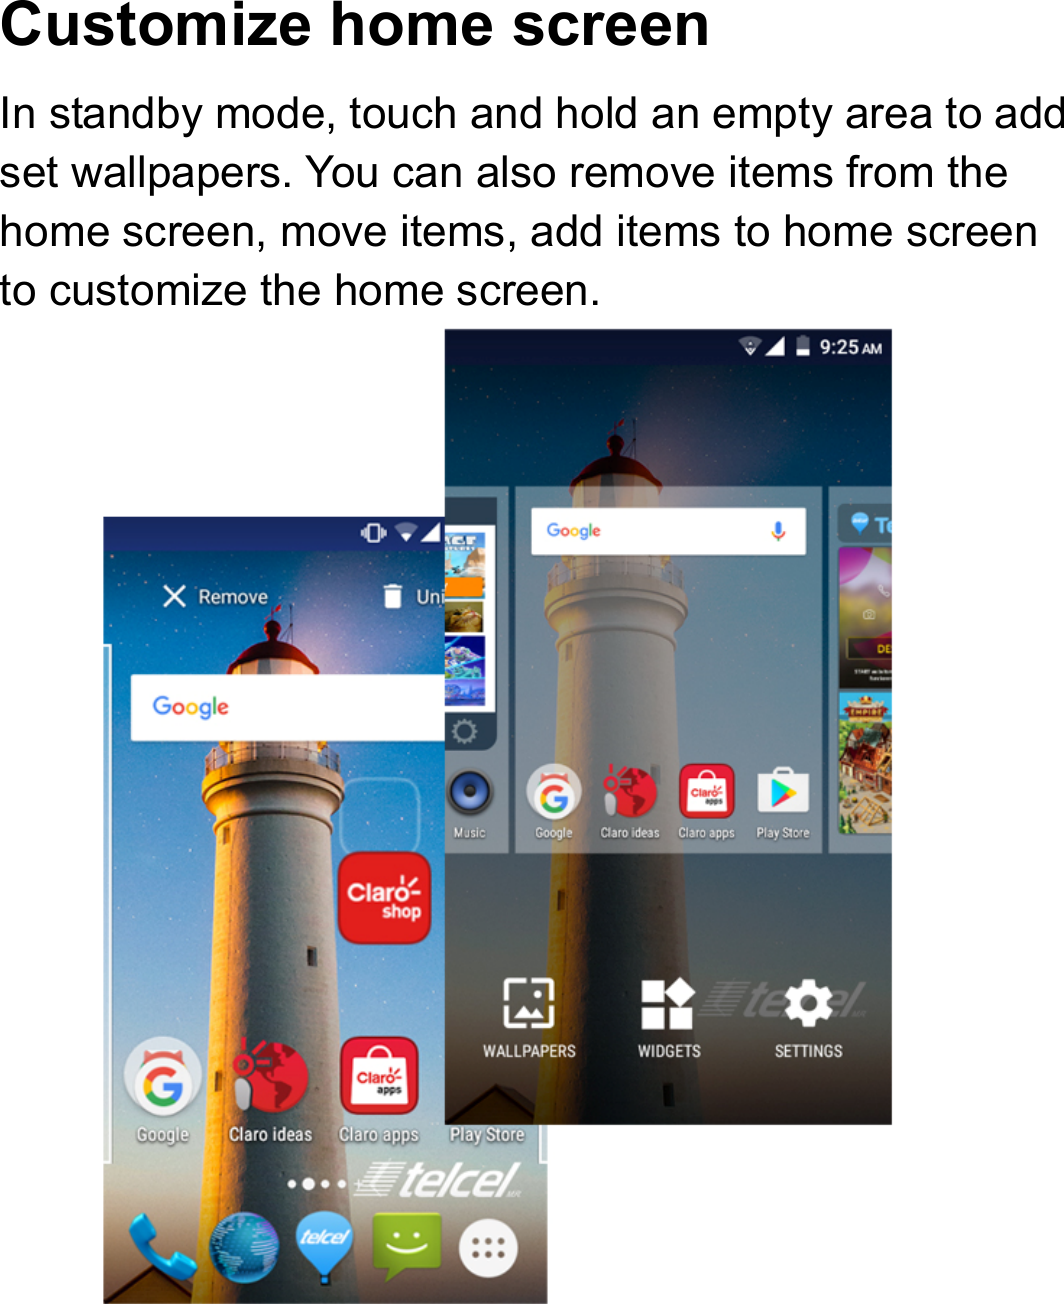 Customize home screen In standby mode, touch and hold an empty area to add set wallpapers. You can also remove items from the home screen, move items, add items to home screen to customize the home screen.         